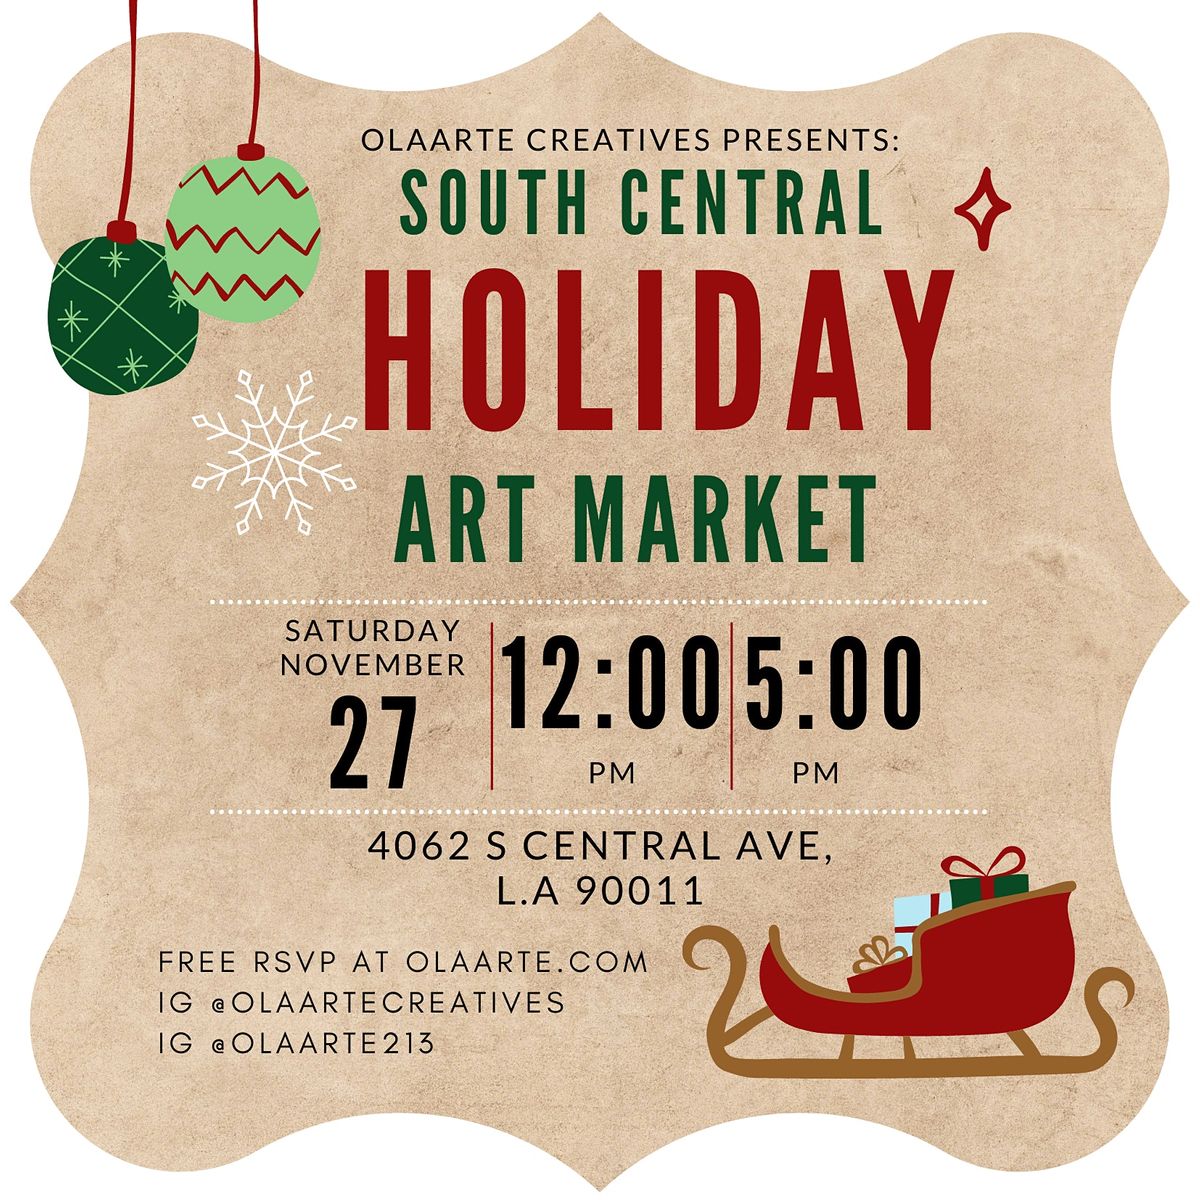 South Central Holiday Art Market